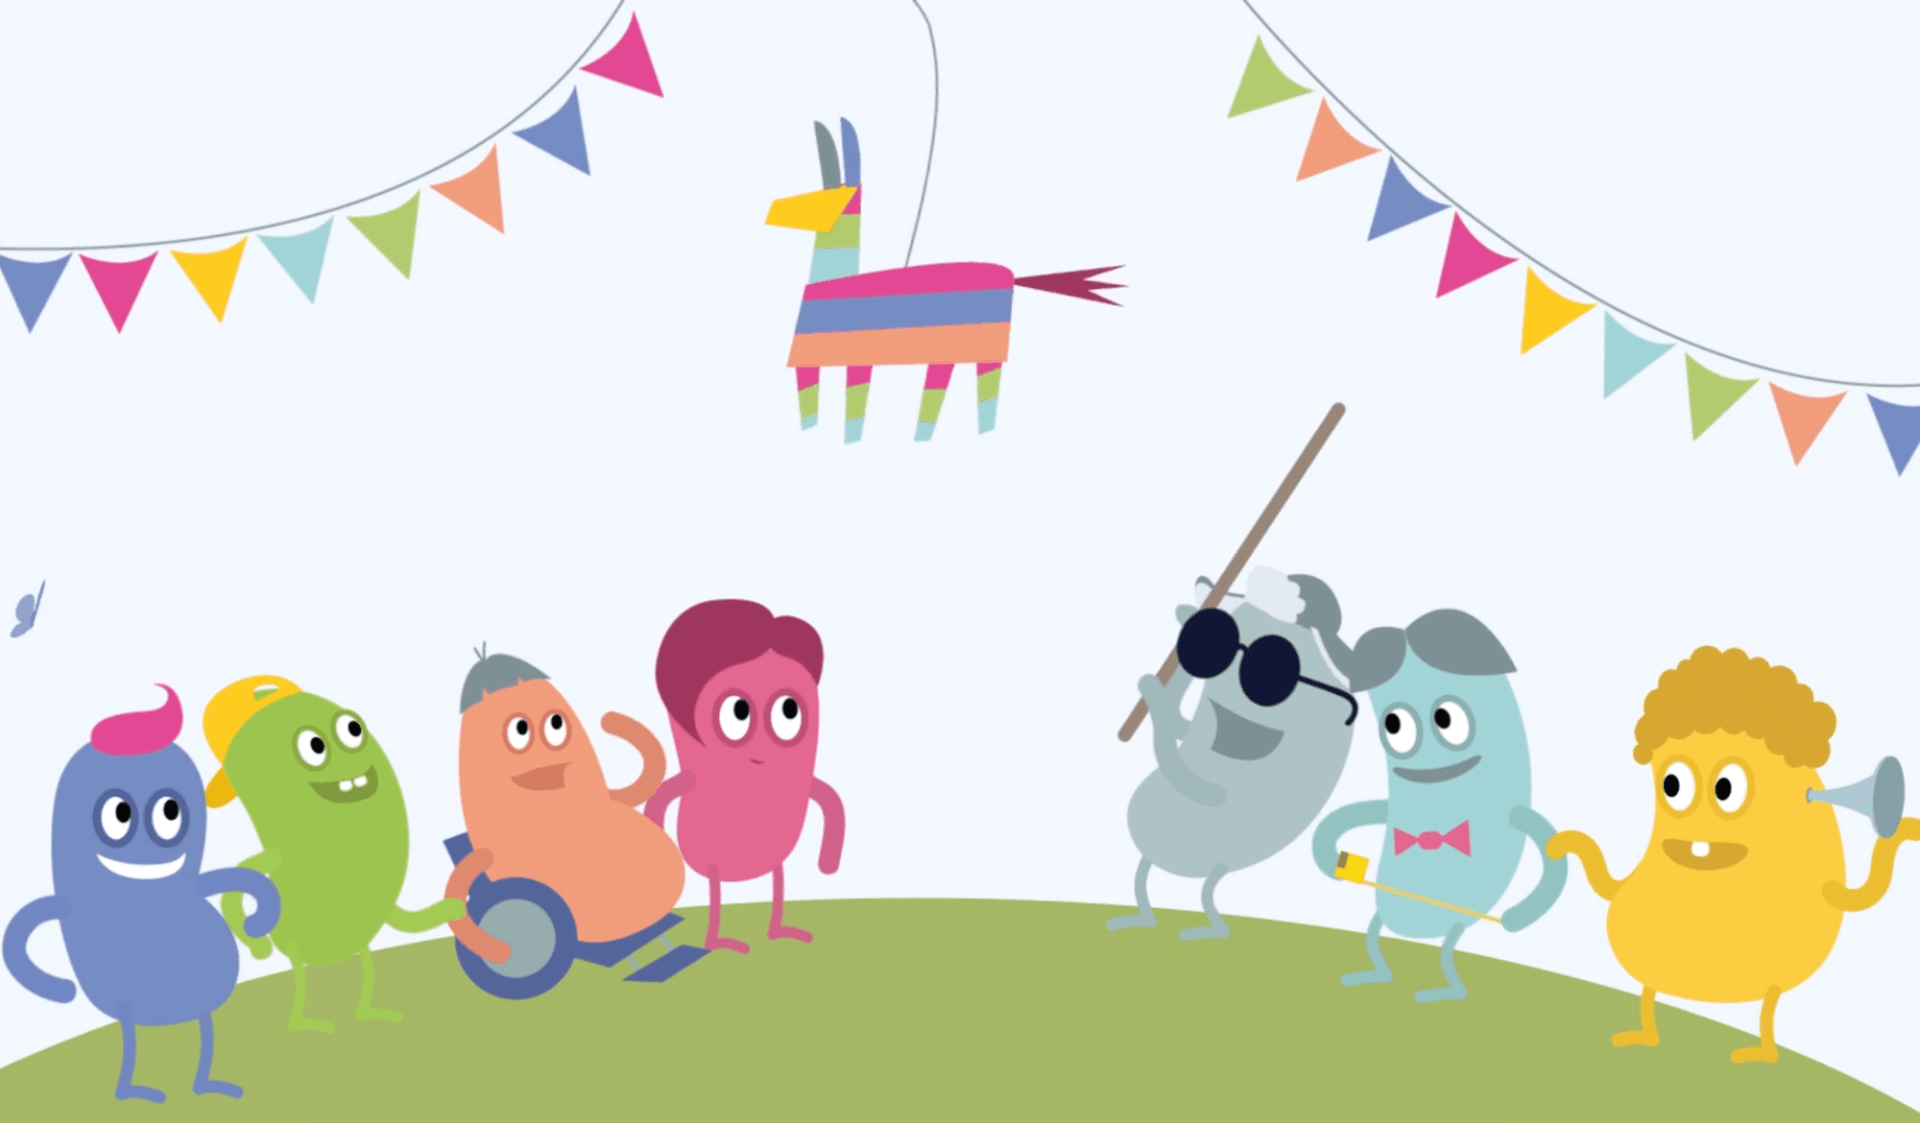 A group of illustrated players hitting a piñata